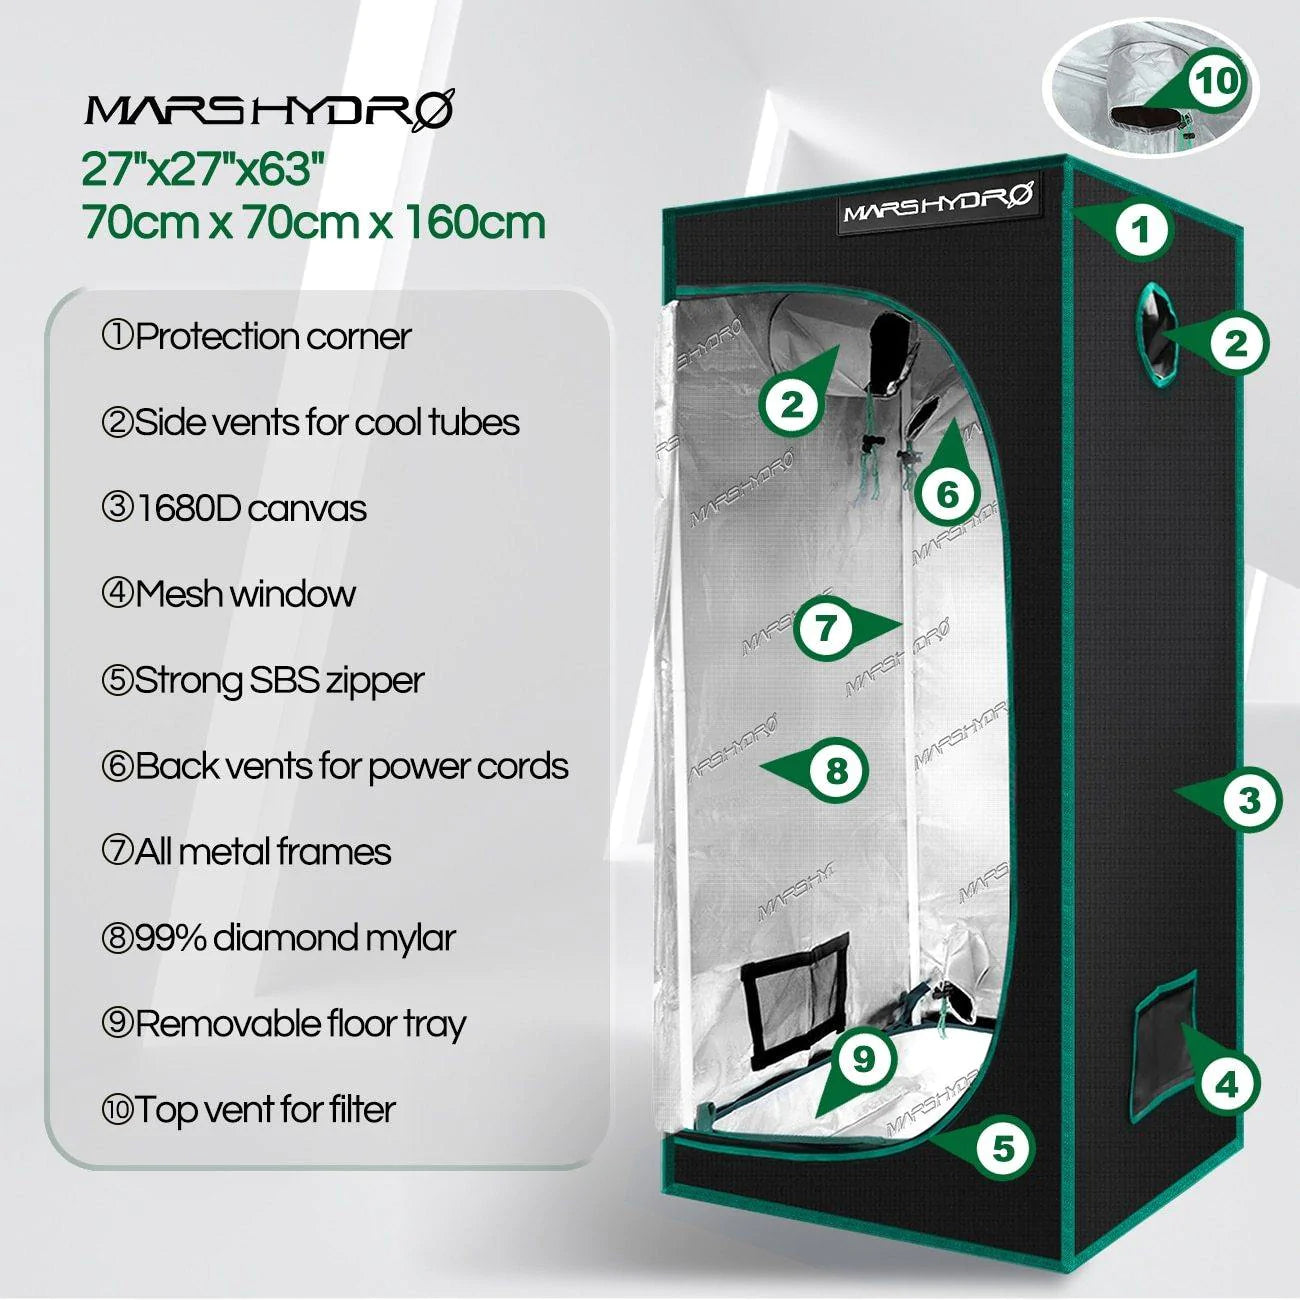 Grow Tent For Indoor Hydroponic Plant Growing and Greenhouses - Buy Confidently with Smart Sales Australia